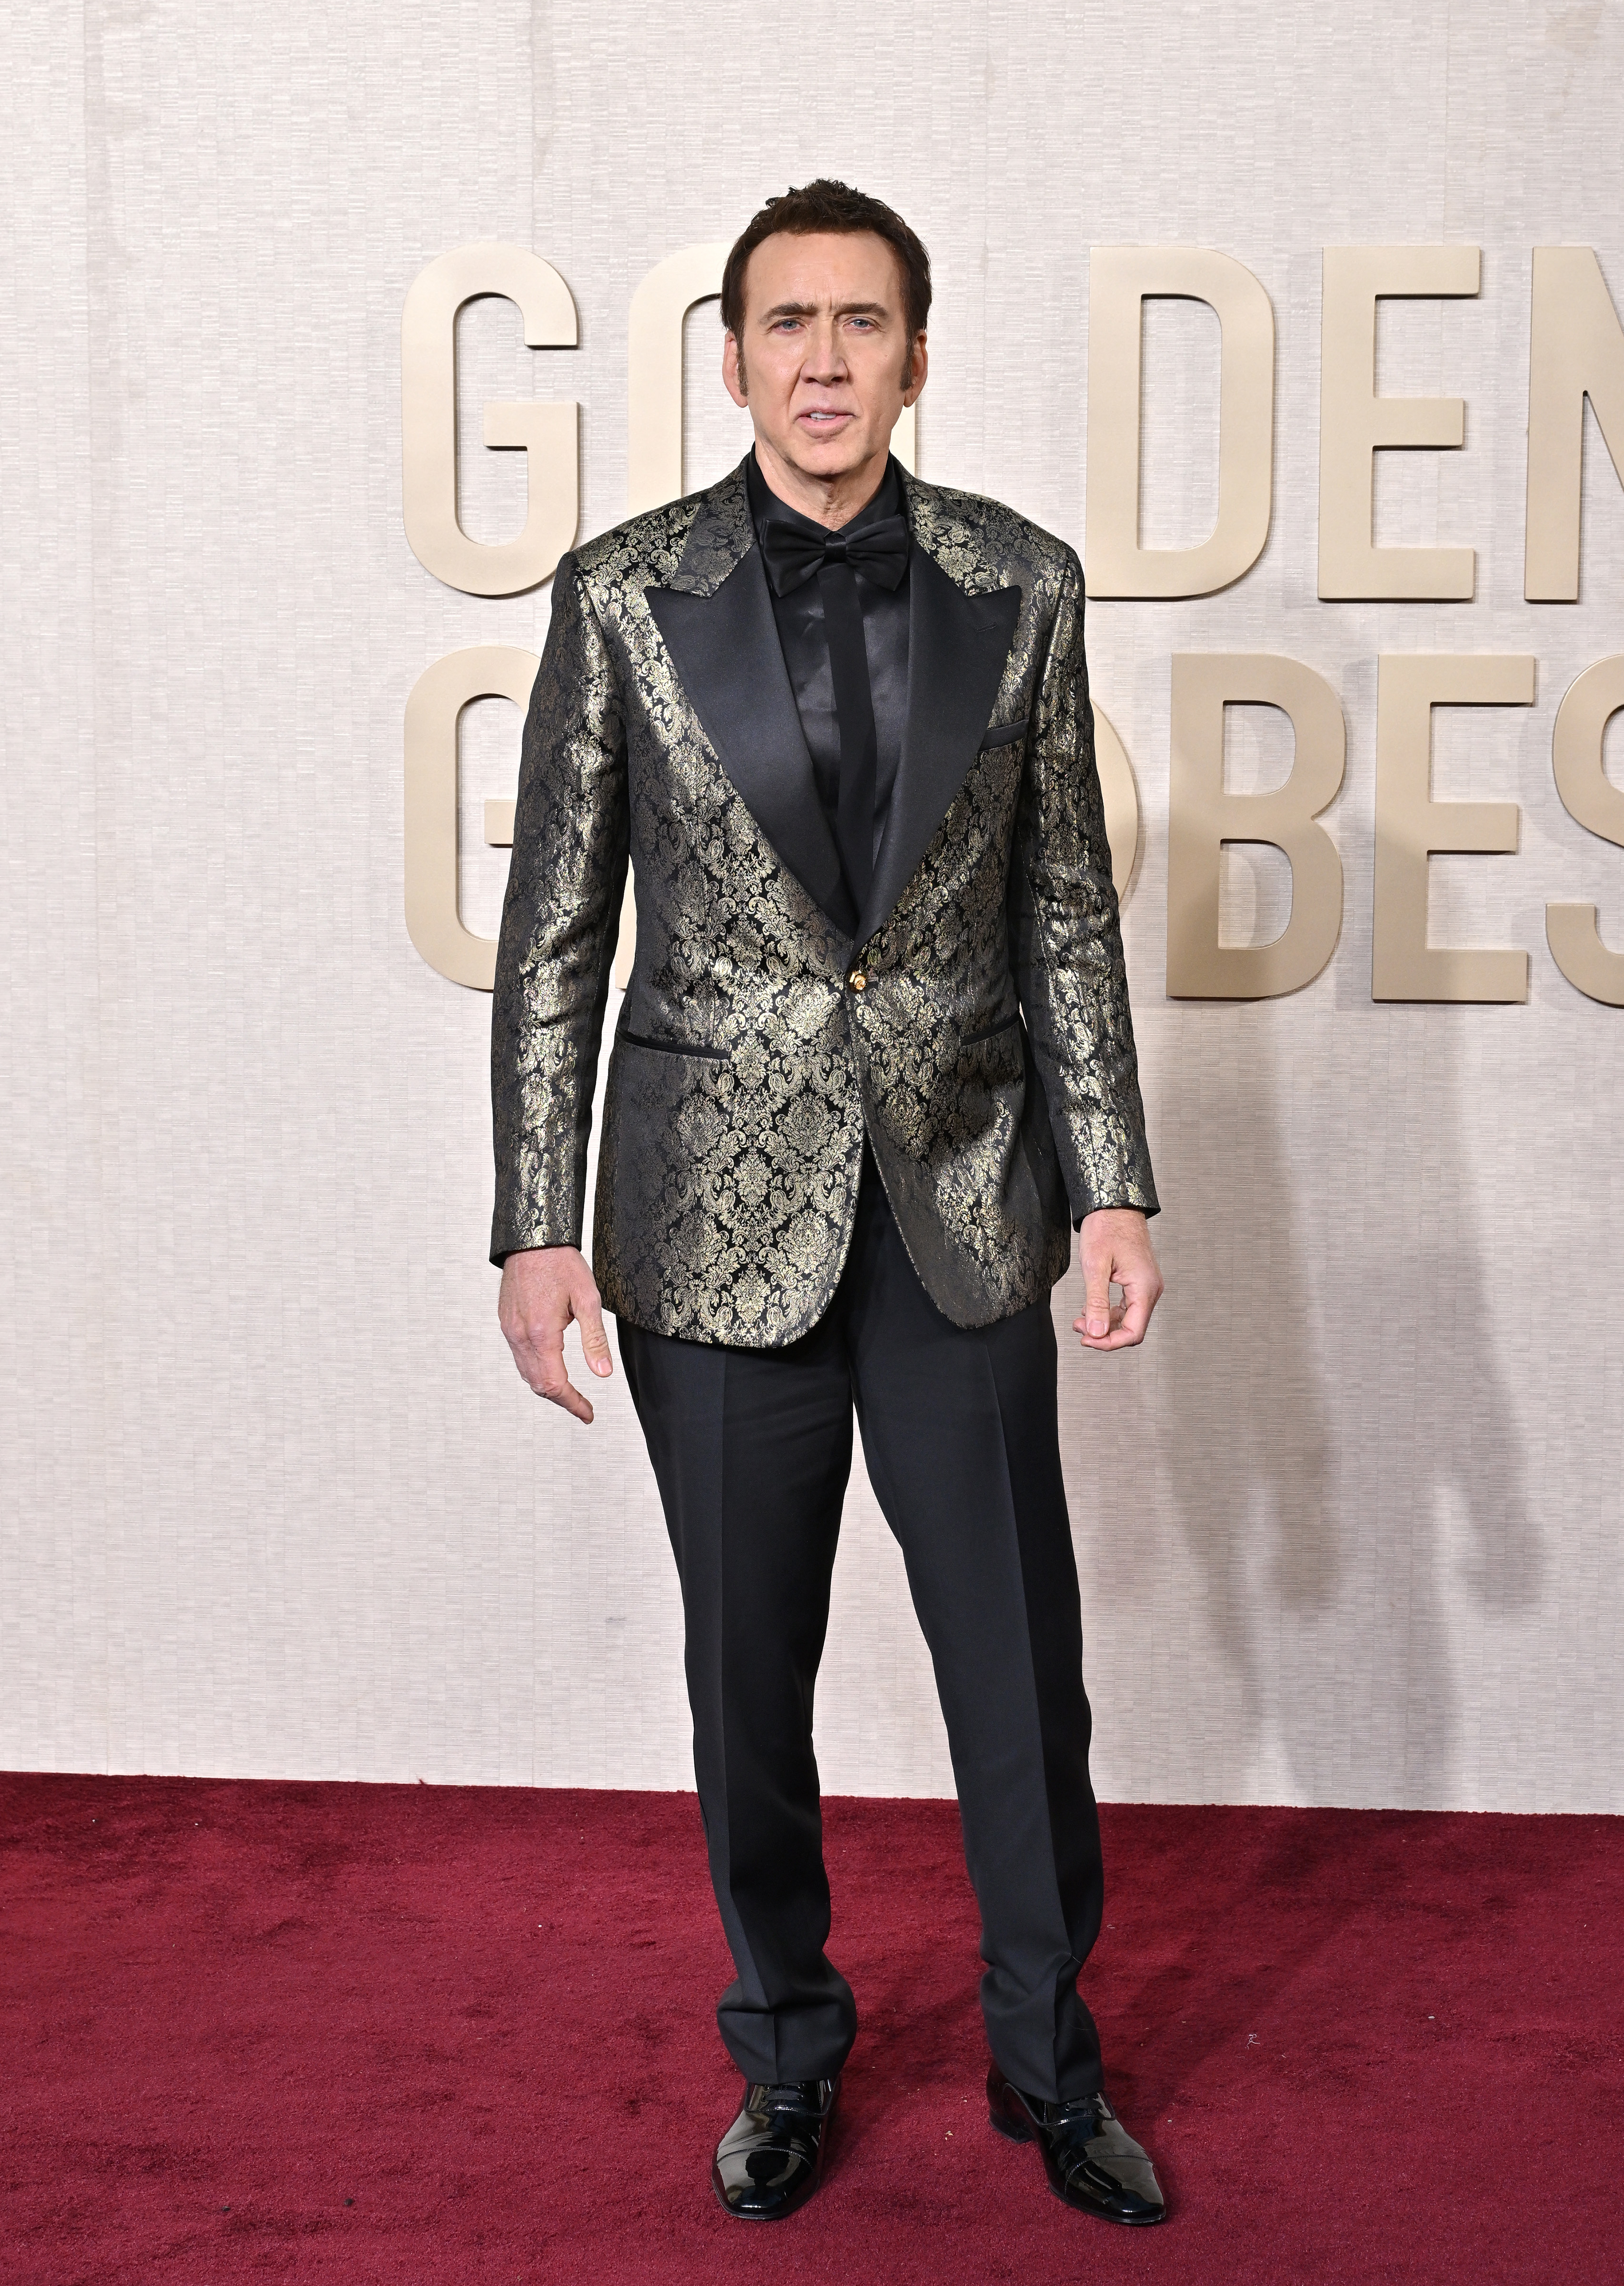 Nicholas Cage in patterned suit jacket and pants stands at a media event